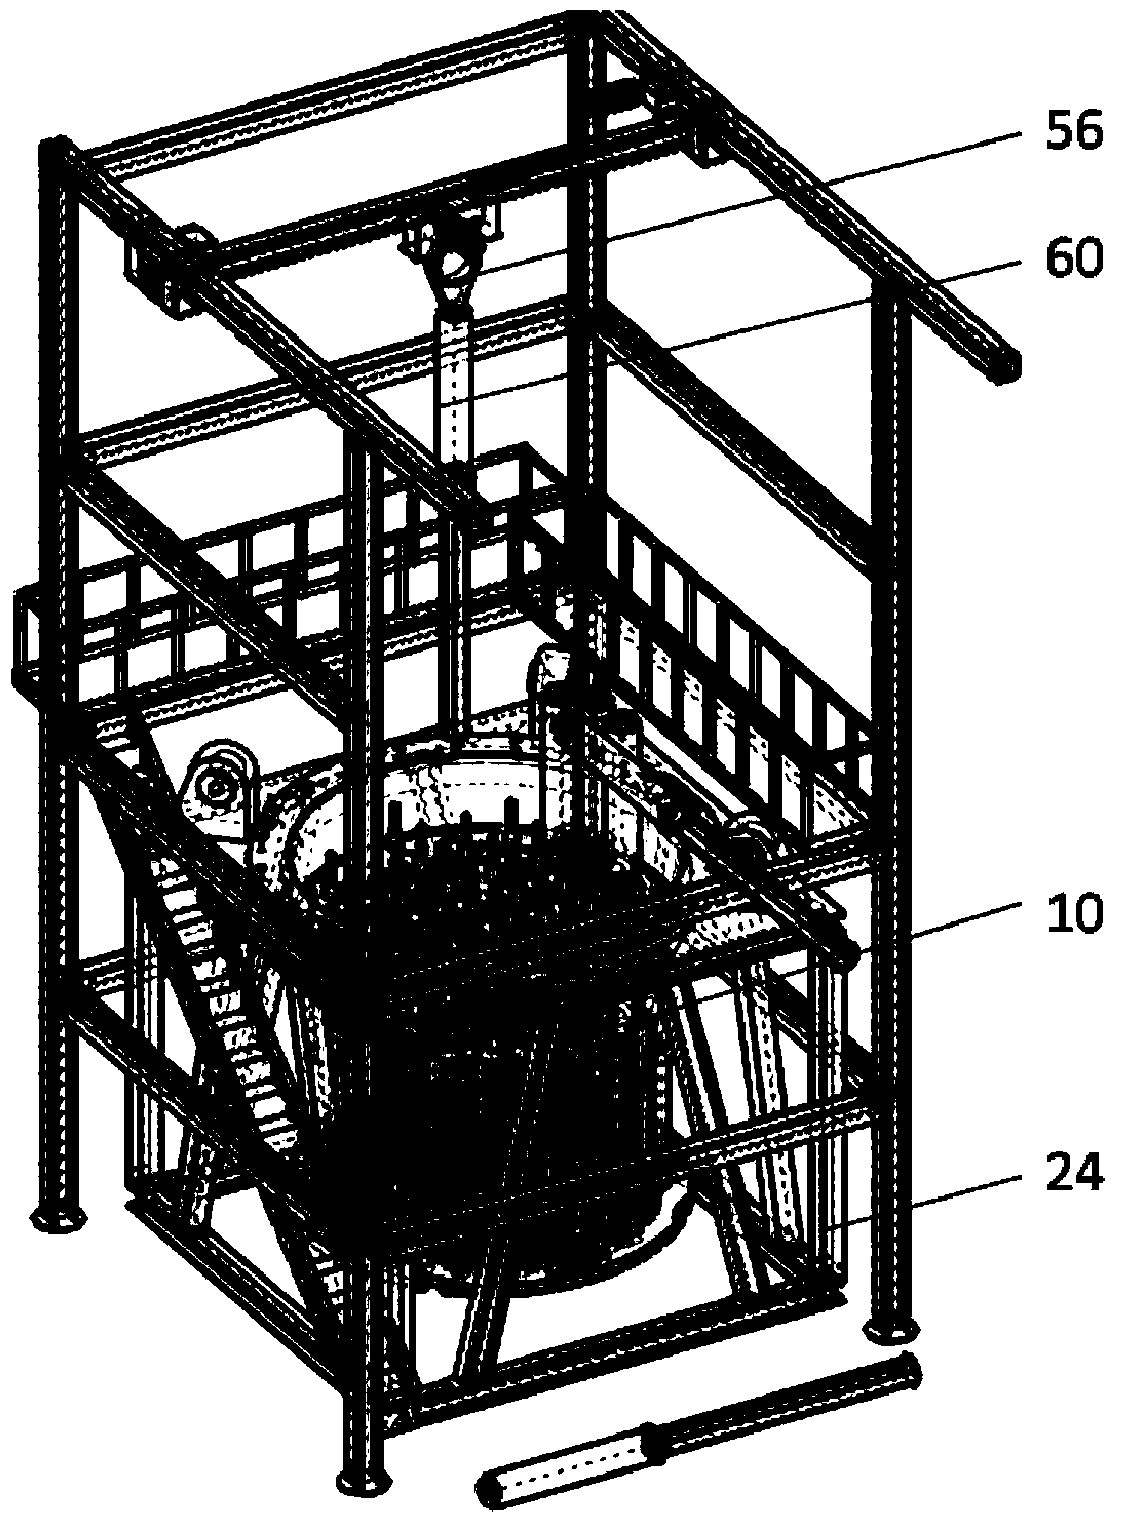 Nuclear power station upper-part in-reactor component mounting method